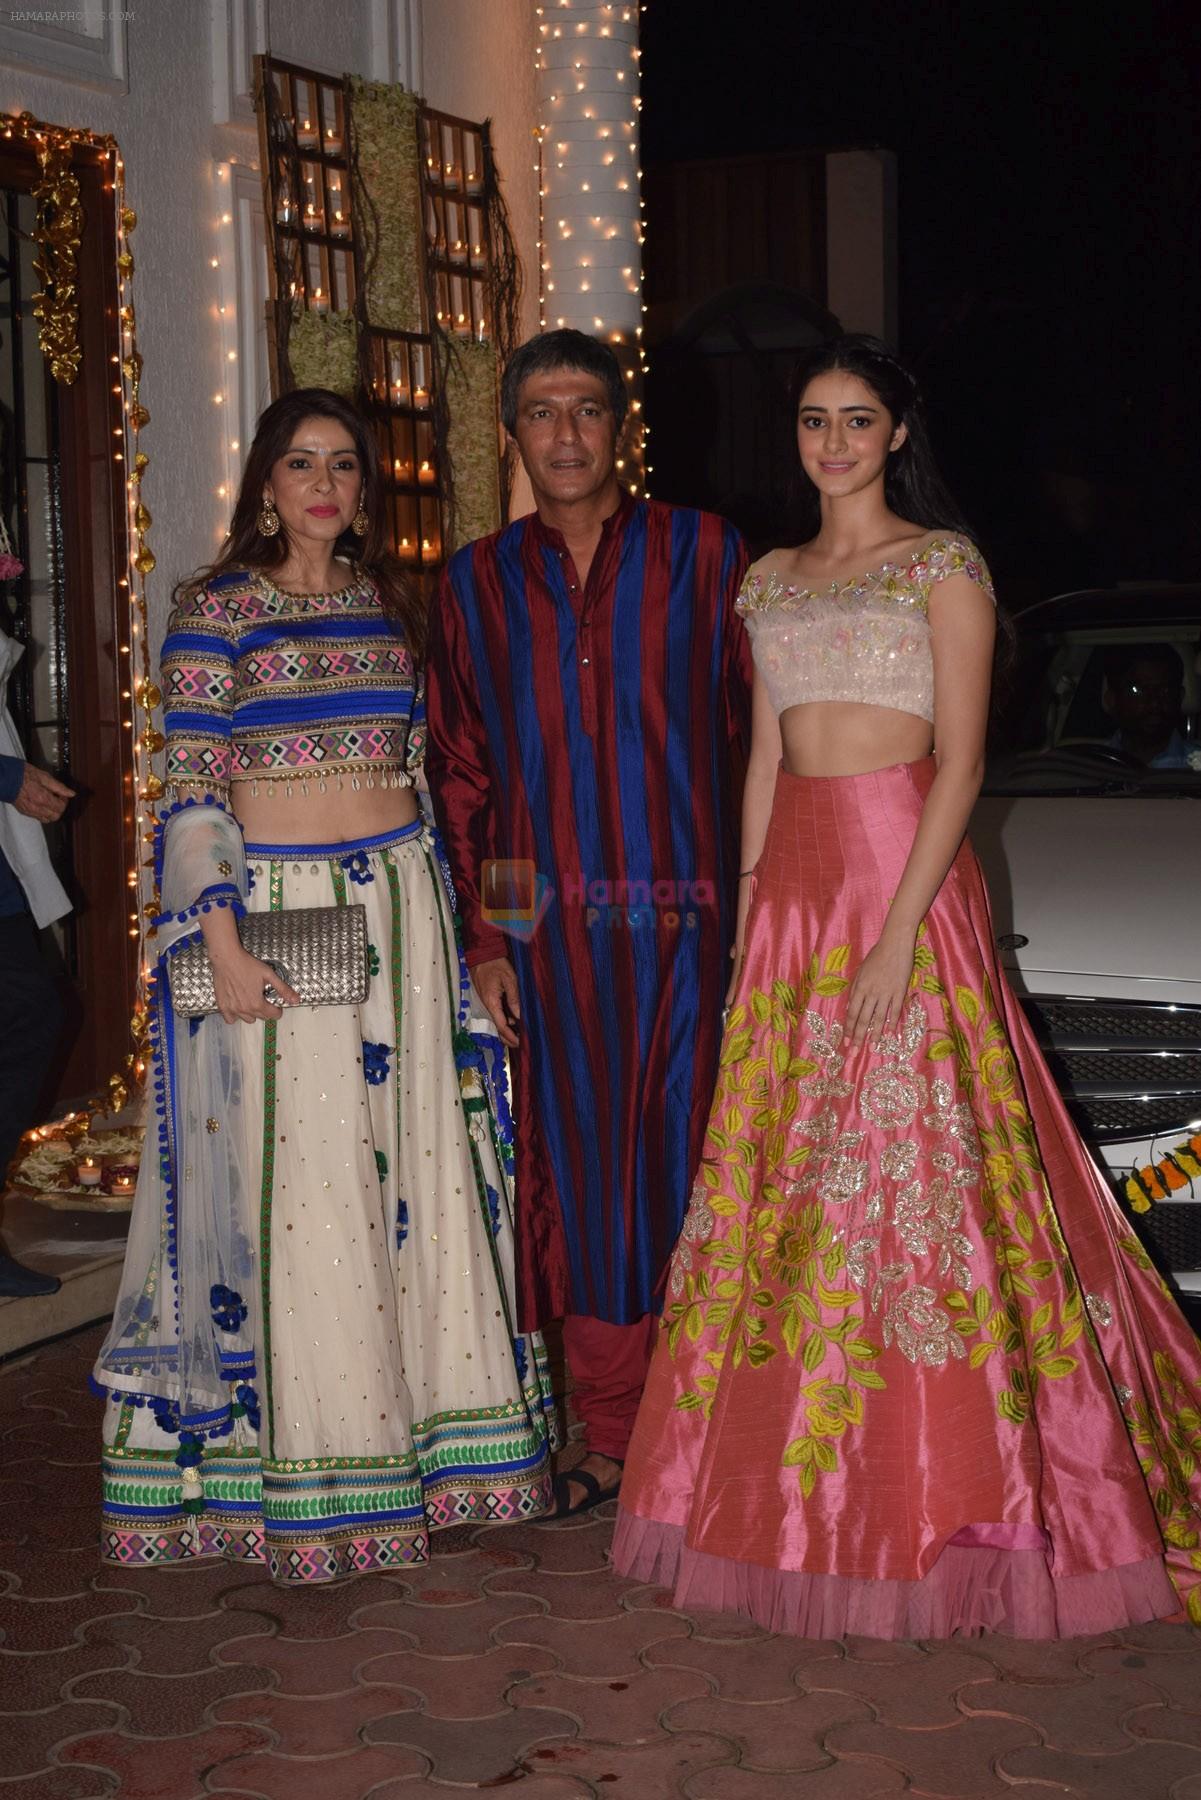 Chunky Pandey at Shilpa Shetty's Diwali party on 20th Oct 2017